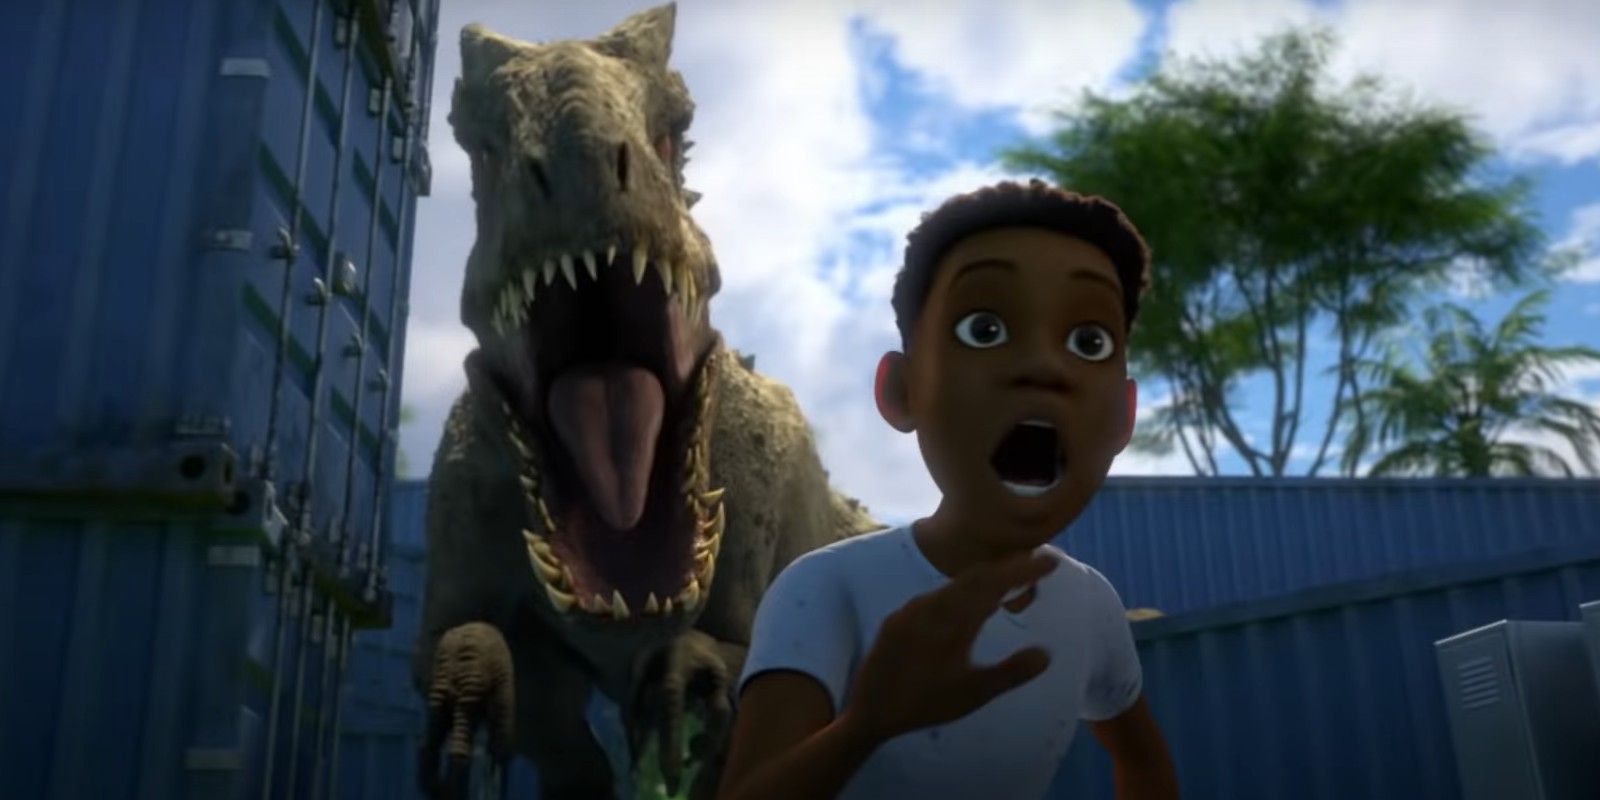 Jurassic World: Camp Cretaceous Cast Guide – Who Voices Each Character